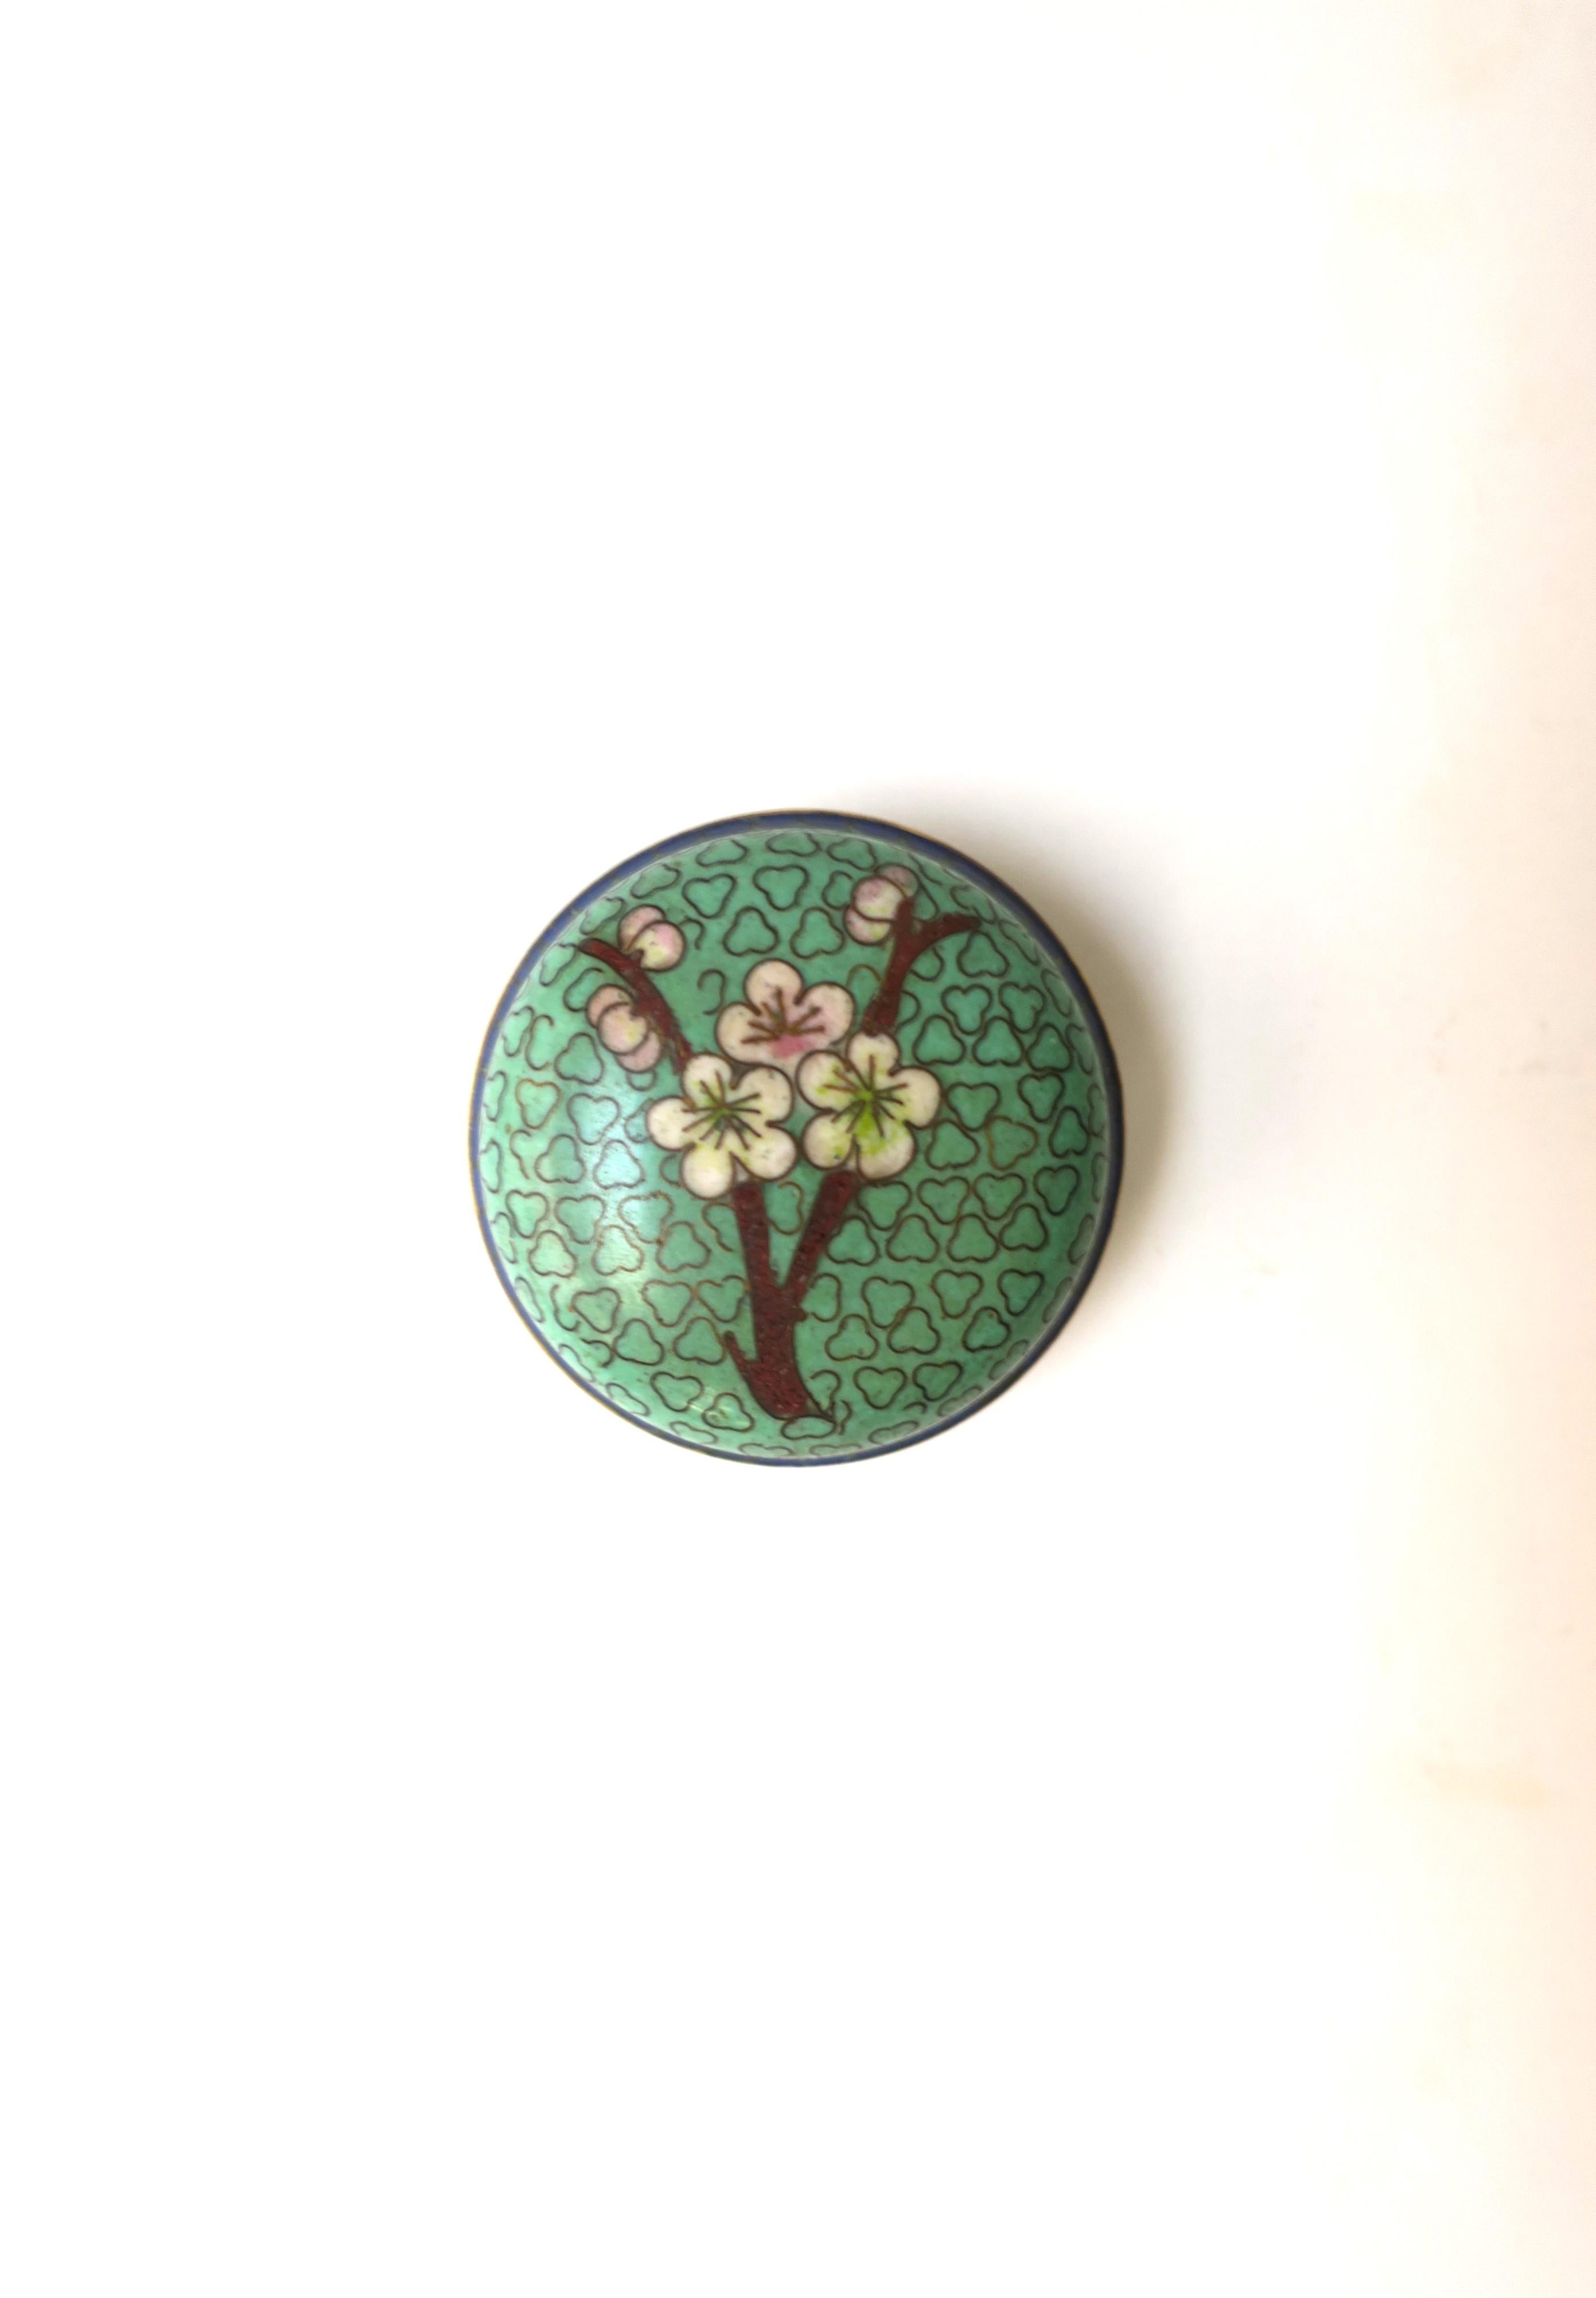 A beautiful small cloisonne box made of colorful enamel and brass, with flower design on lid, in the Chinoiserie style, circa mid-20th century. A convenient piece to hold a ring or earrings (demonstrated holding a cocktail ring, and earrings.) A